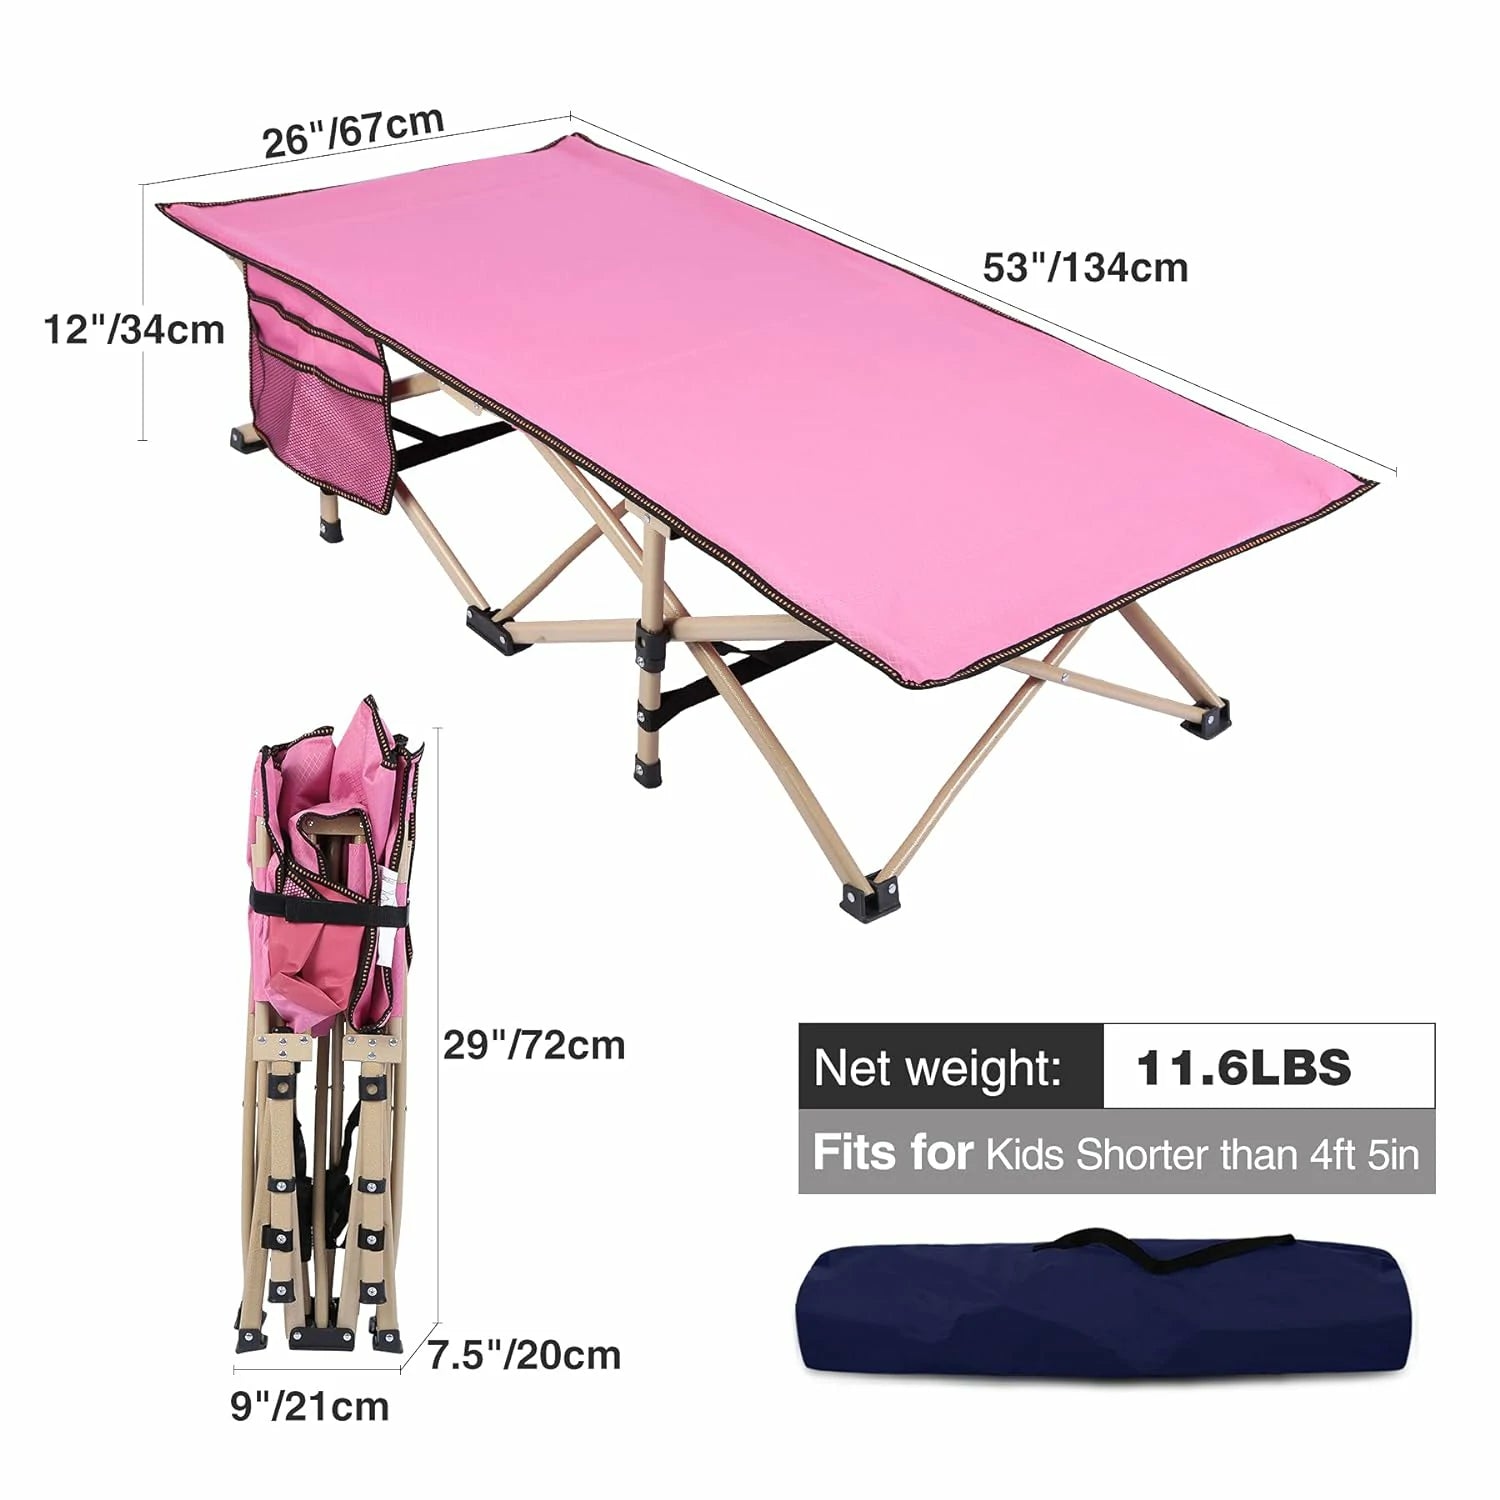 REDCAMP Folding Kids Cot for Sleeping with Sleeping Bag 3-7